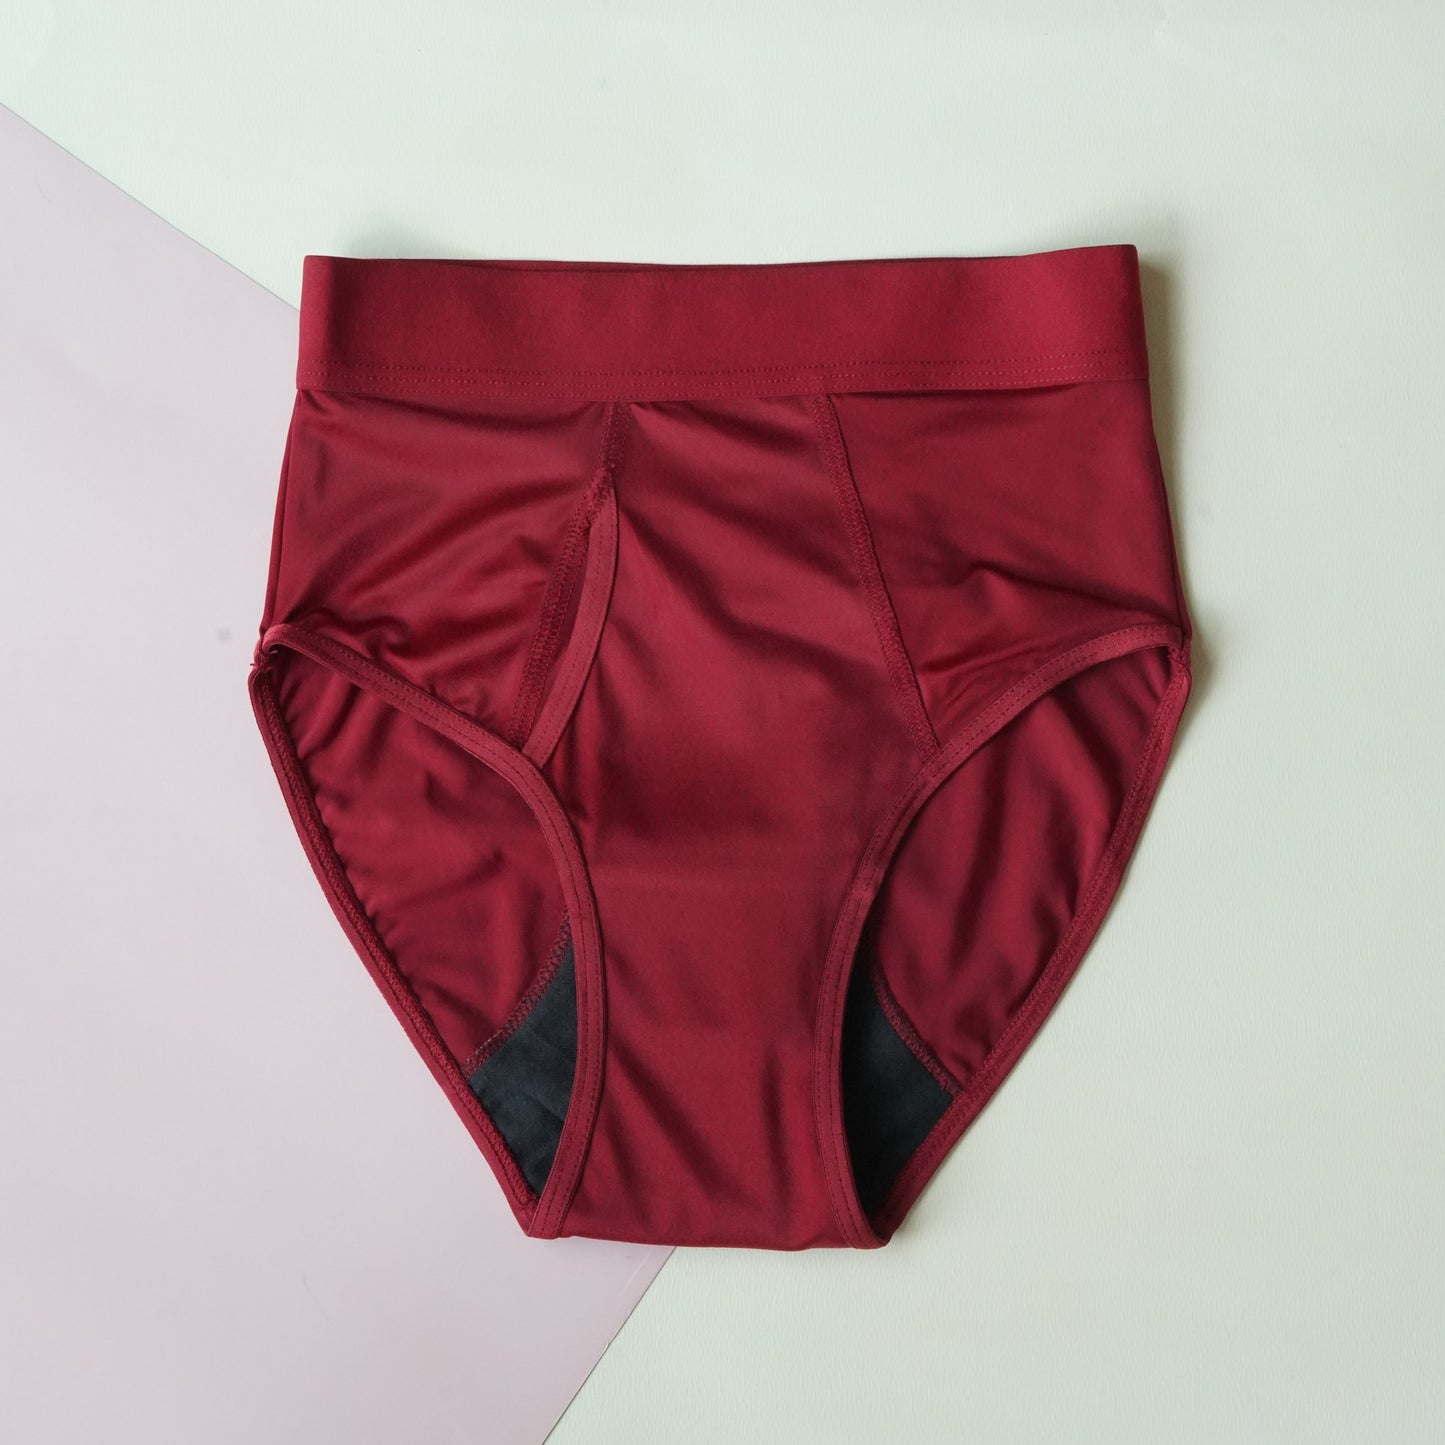 High Waist Period Briefs for Winged Pads | Rhubarb